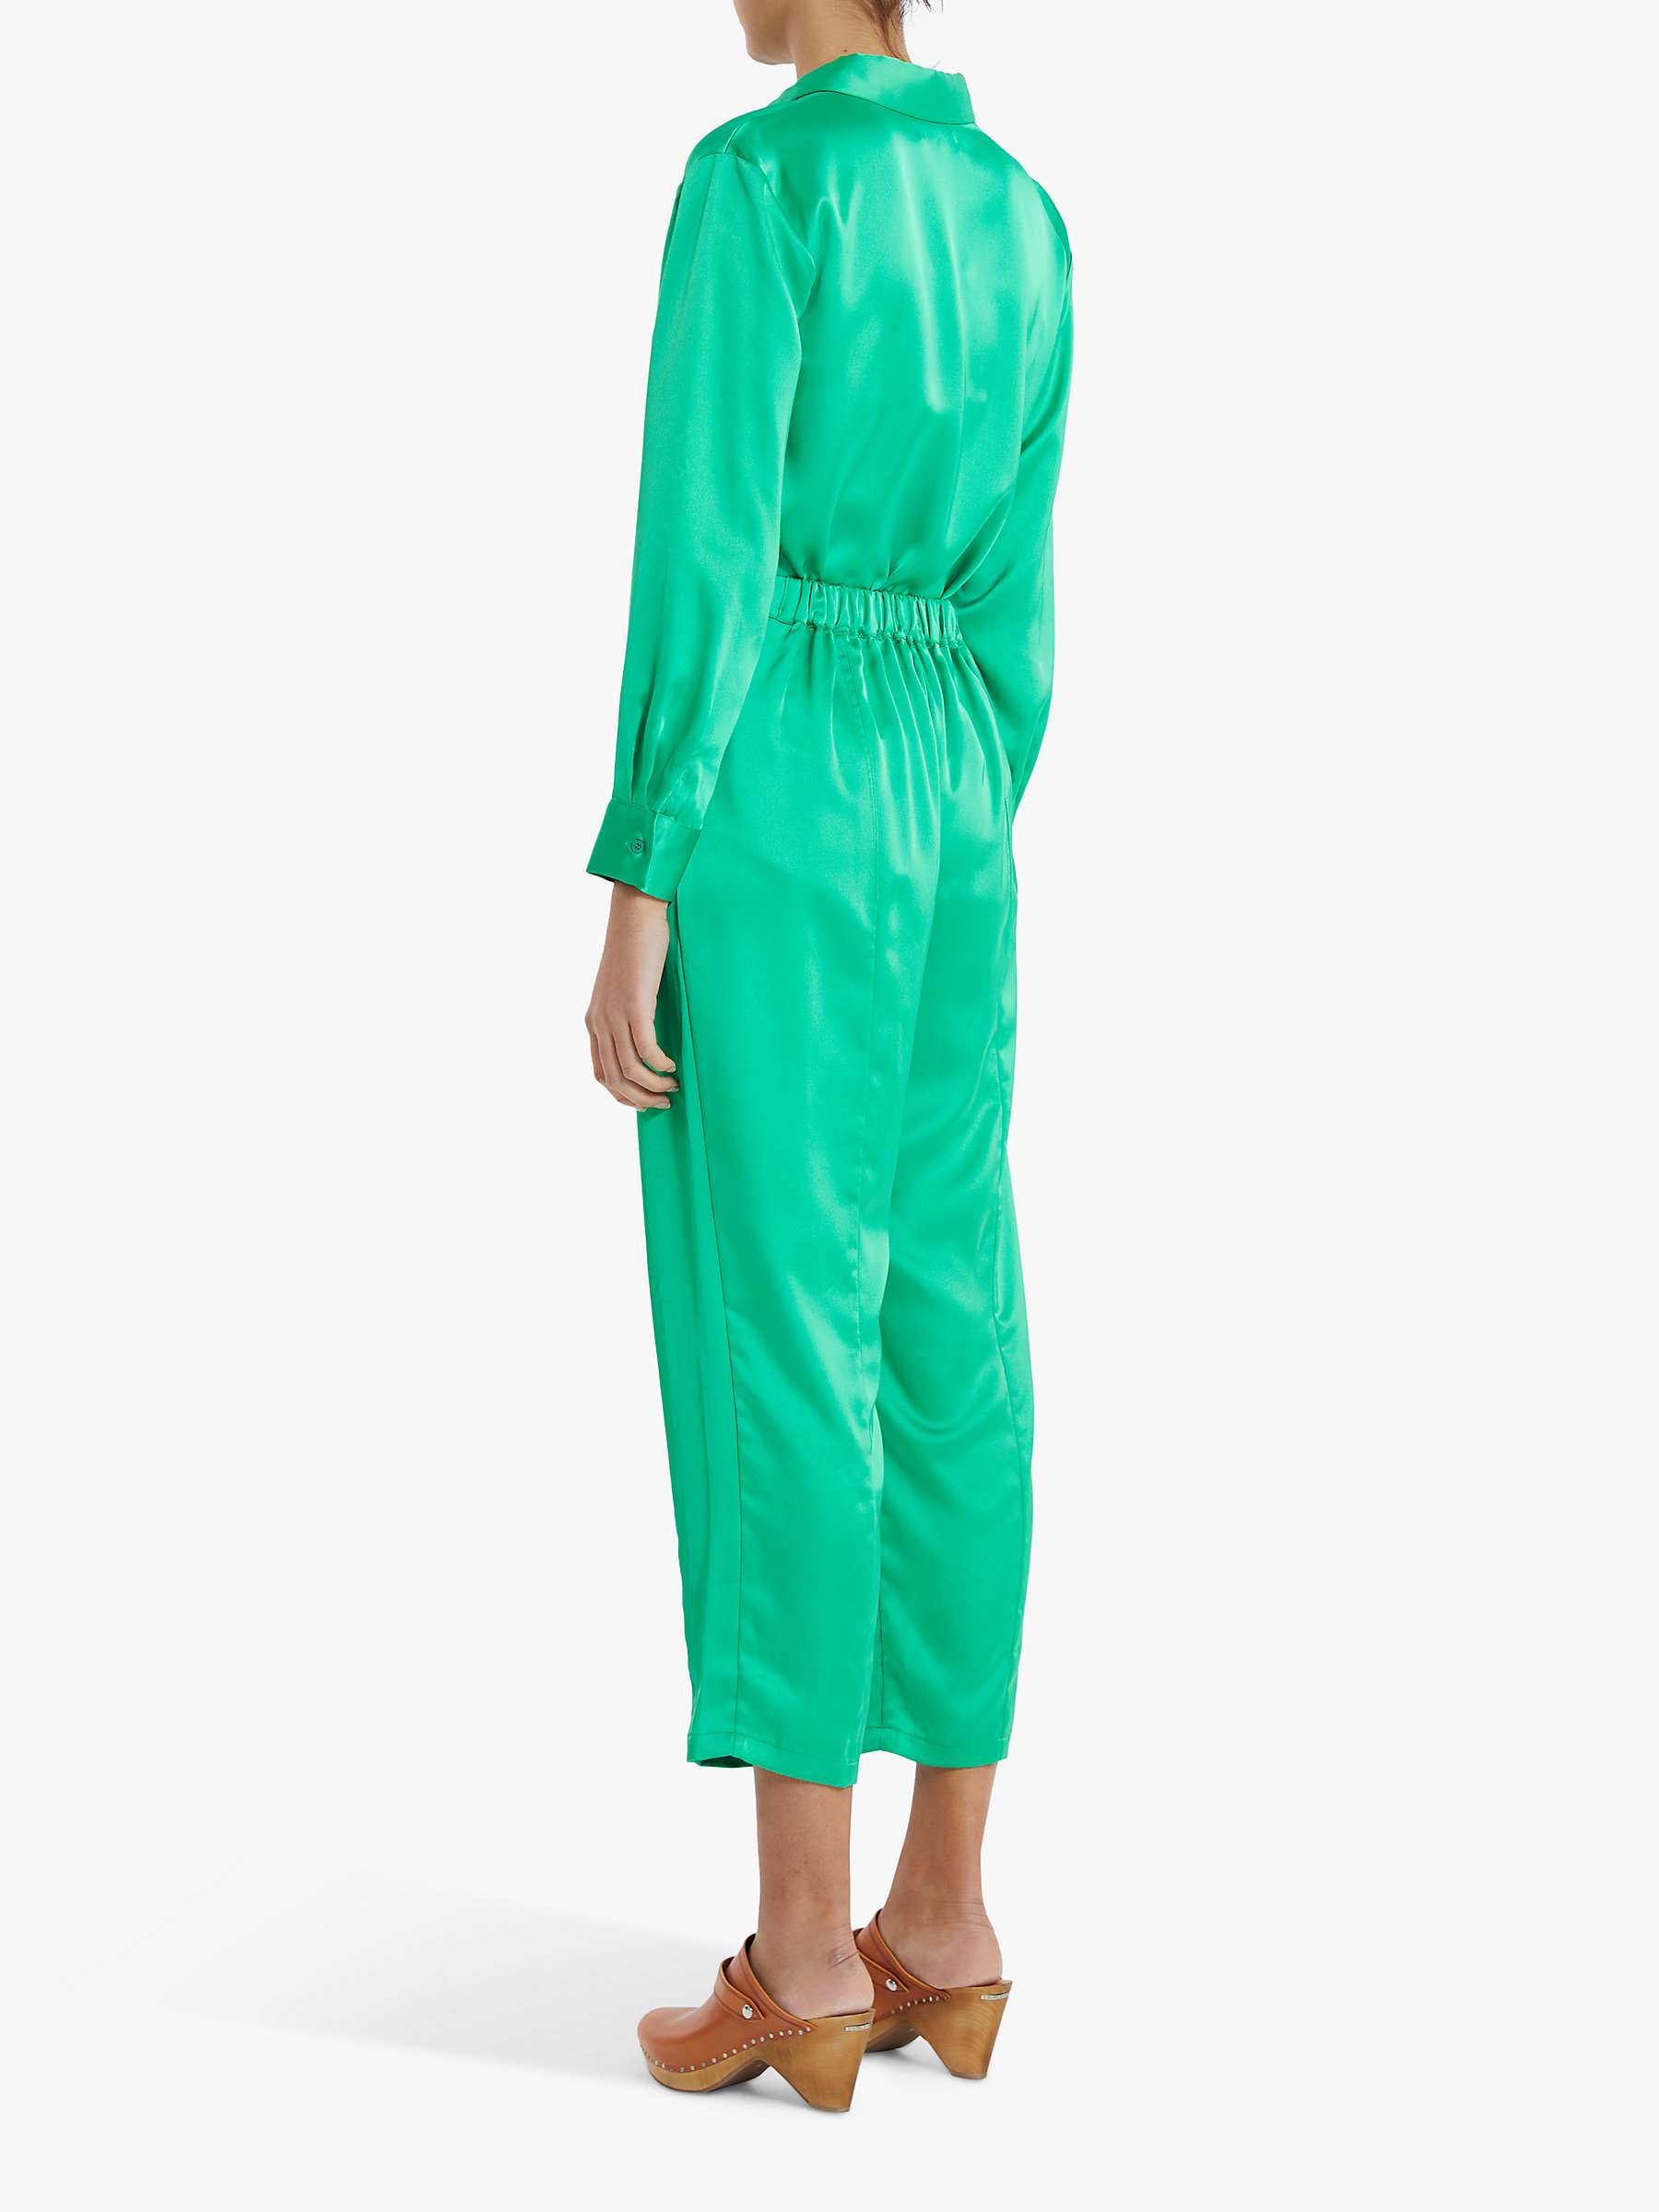 Buy Lollys Laundry Kayla Loose Fitted Shirt, Green Online at johnlewis.com